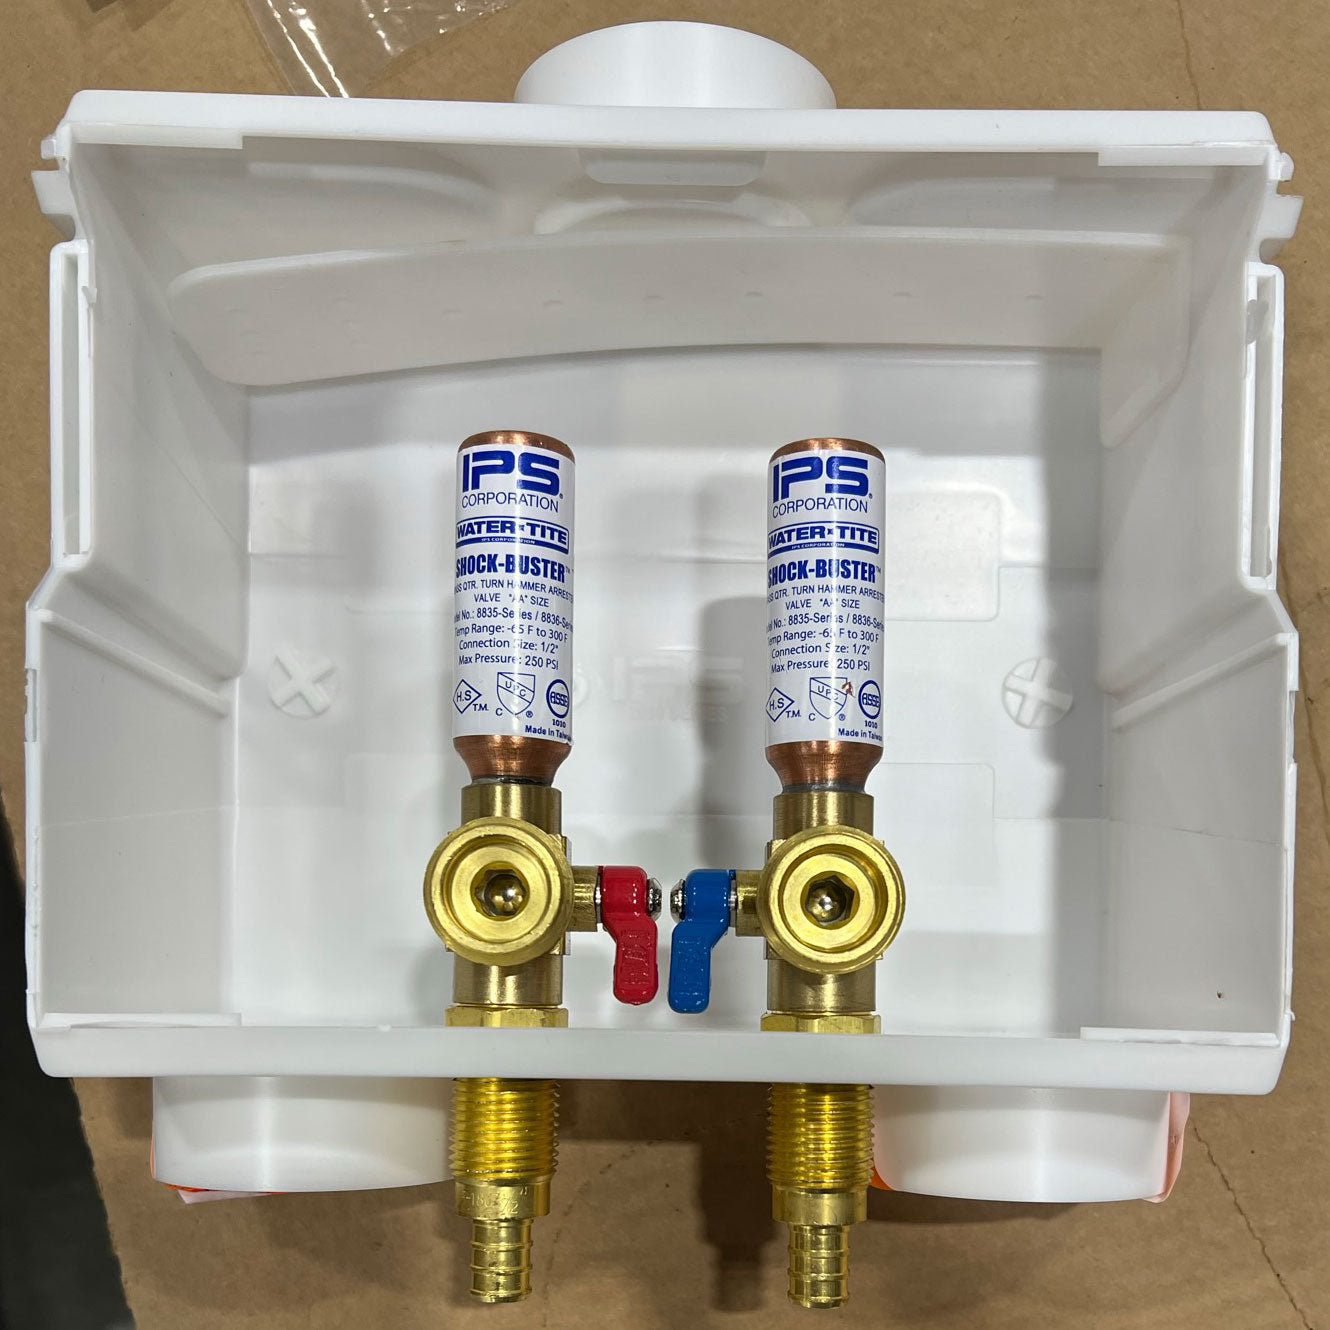 DU-All Dual Drain Washing Machine Outlet Box - Brass Quarter Turn Valves with Arresters - 1/2" Uponor